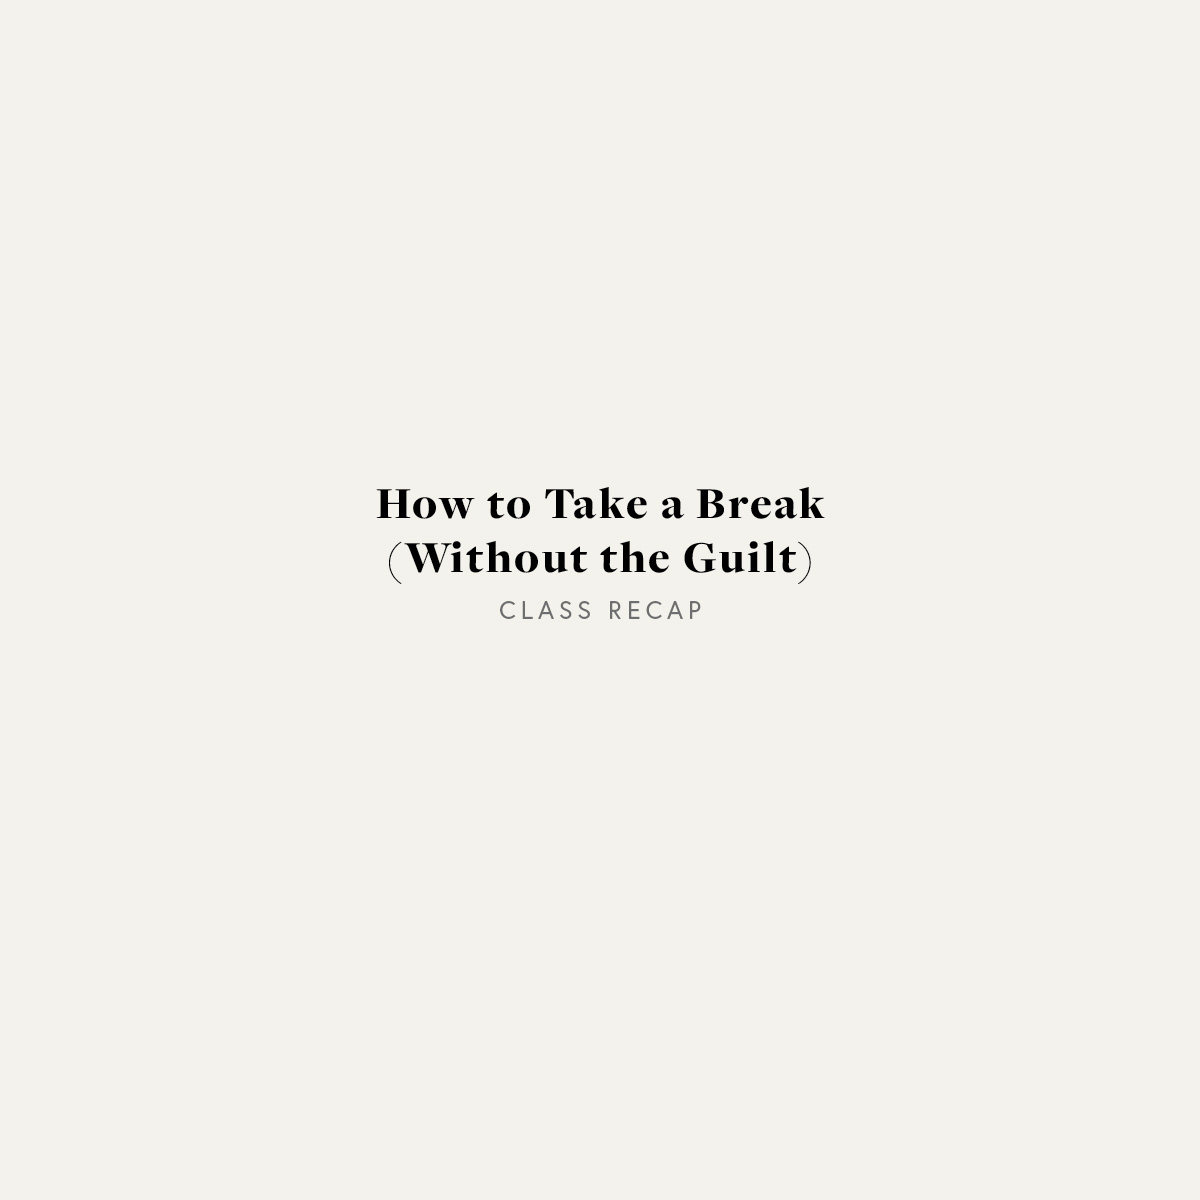 How to Take a Break (Without the Guilt) Class Recap